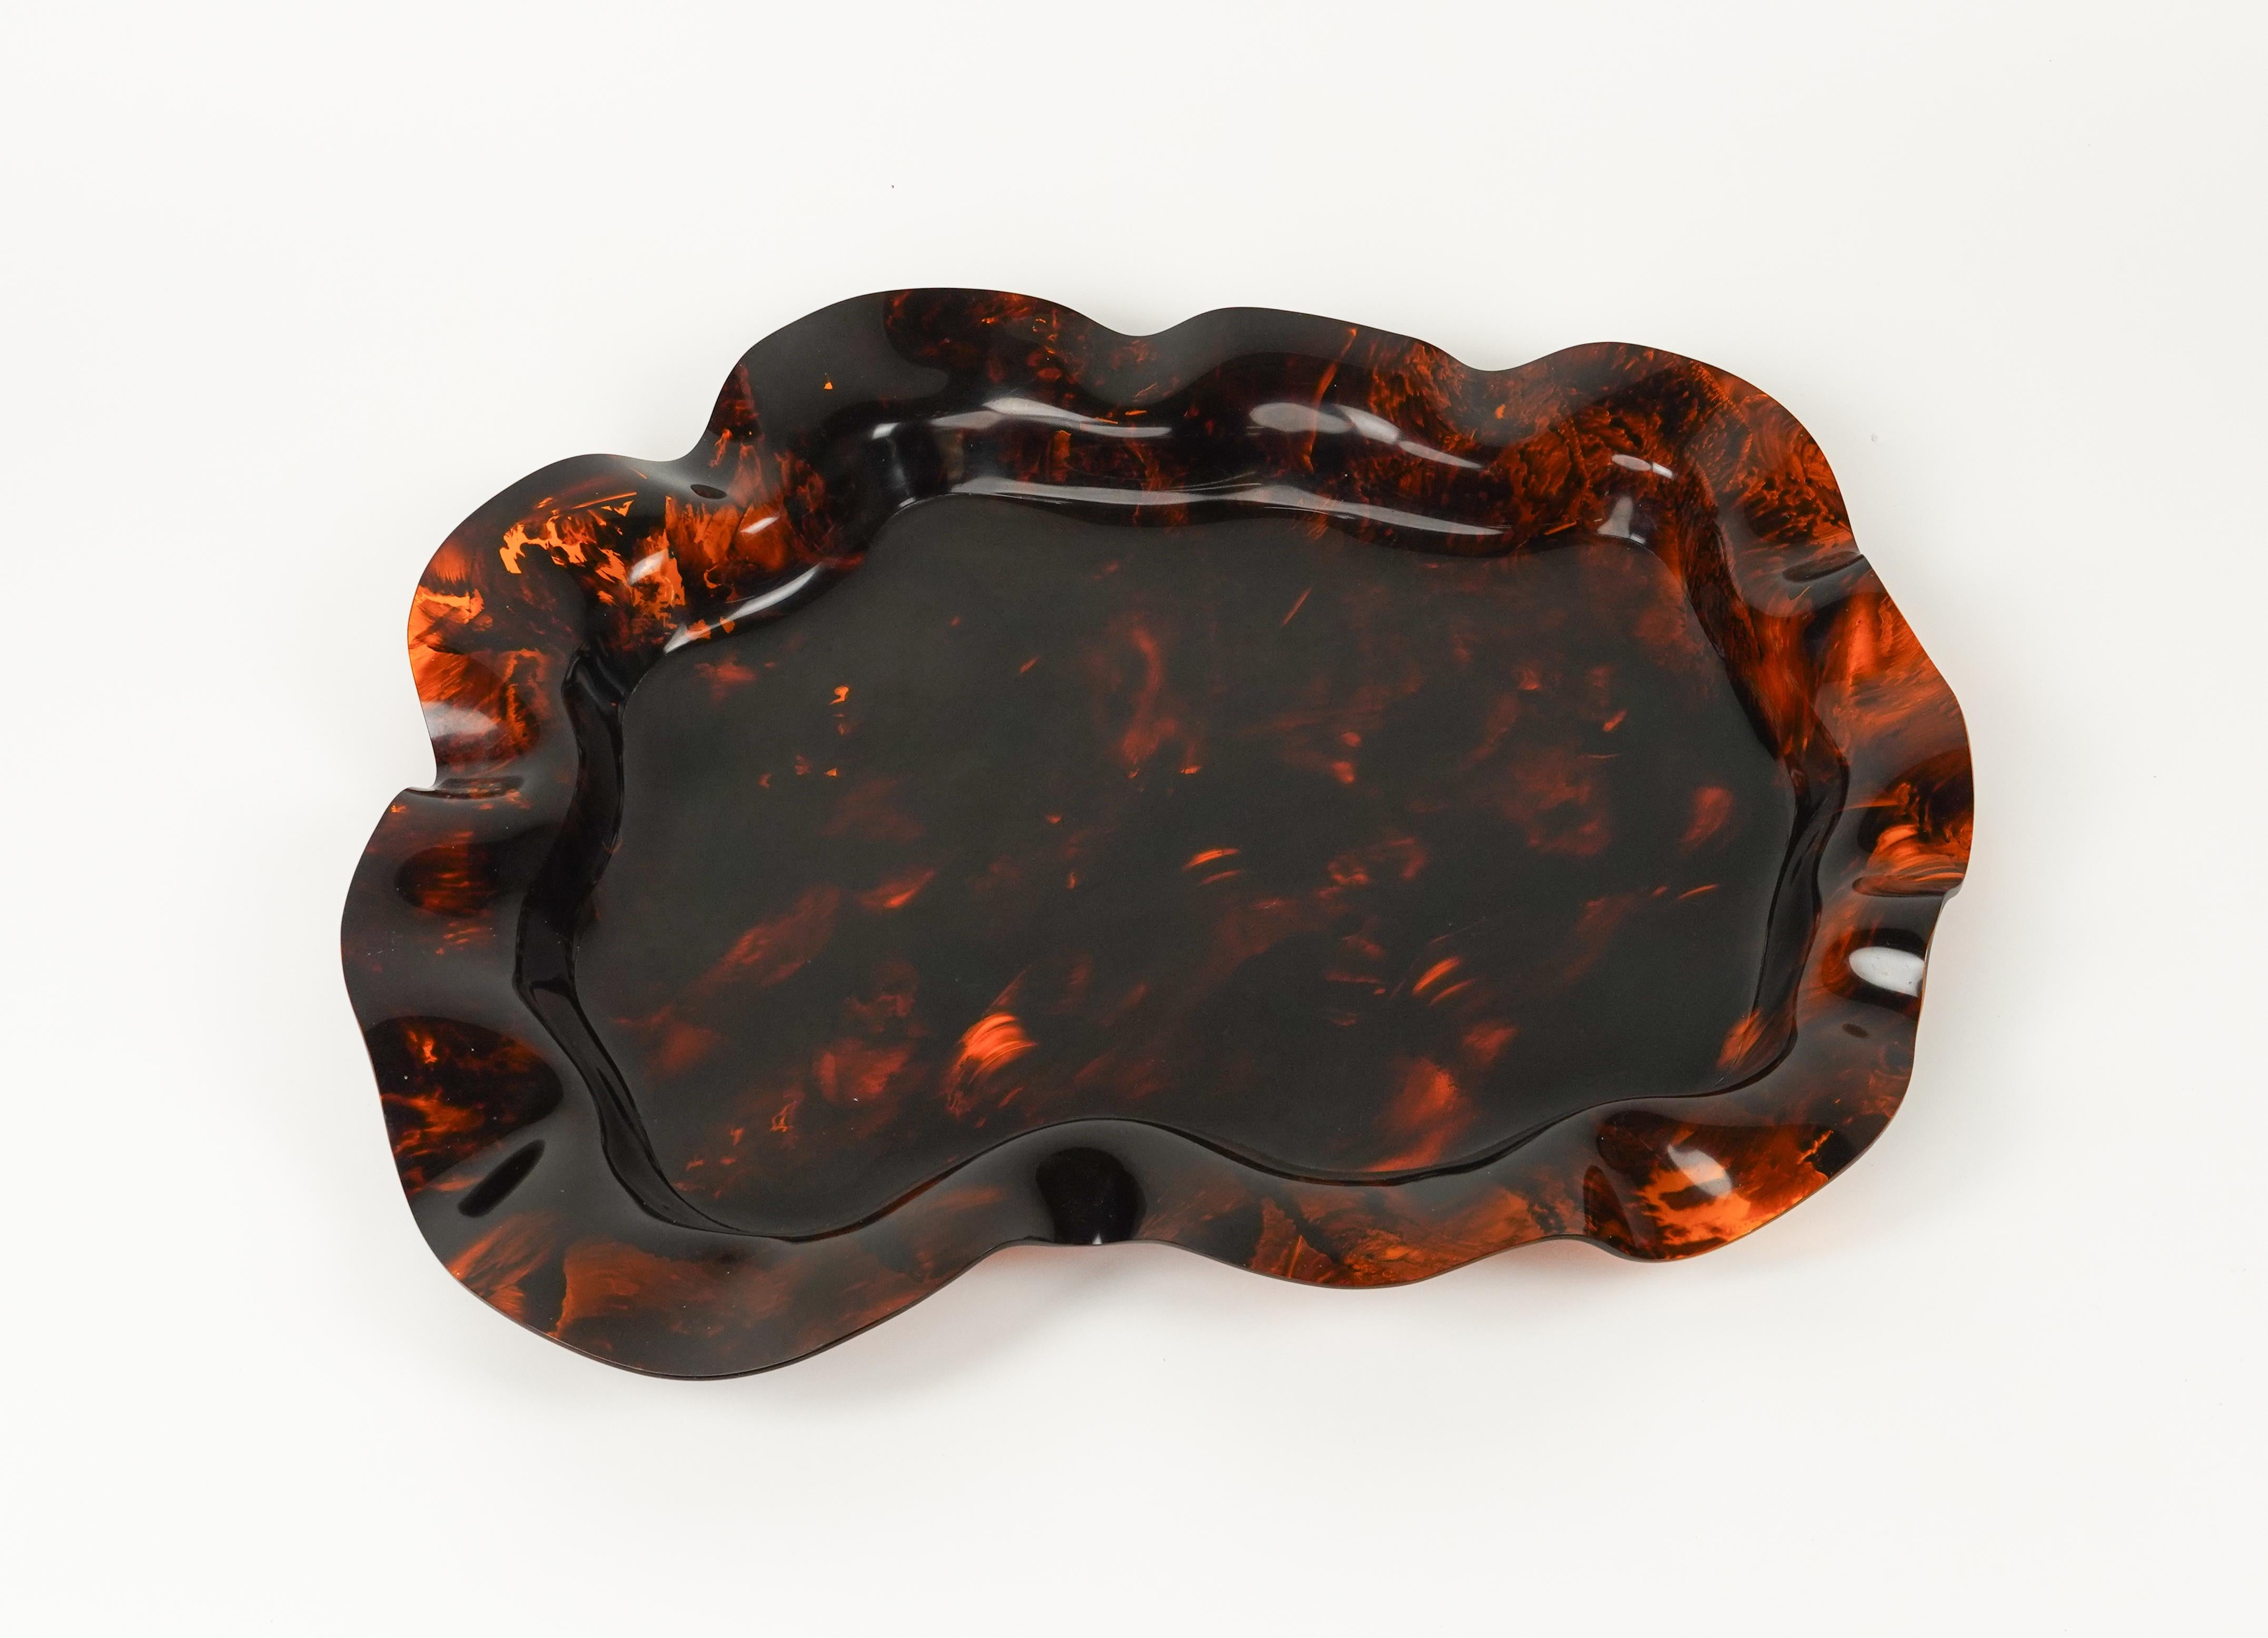 Mid-Century Modern Large Serving Tray or Centerpiece Lucite Faux Tortoiseshell, Italy 1970s For Sale